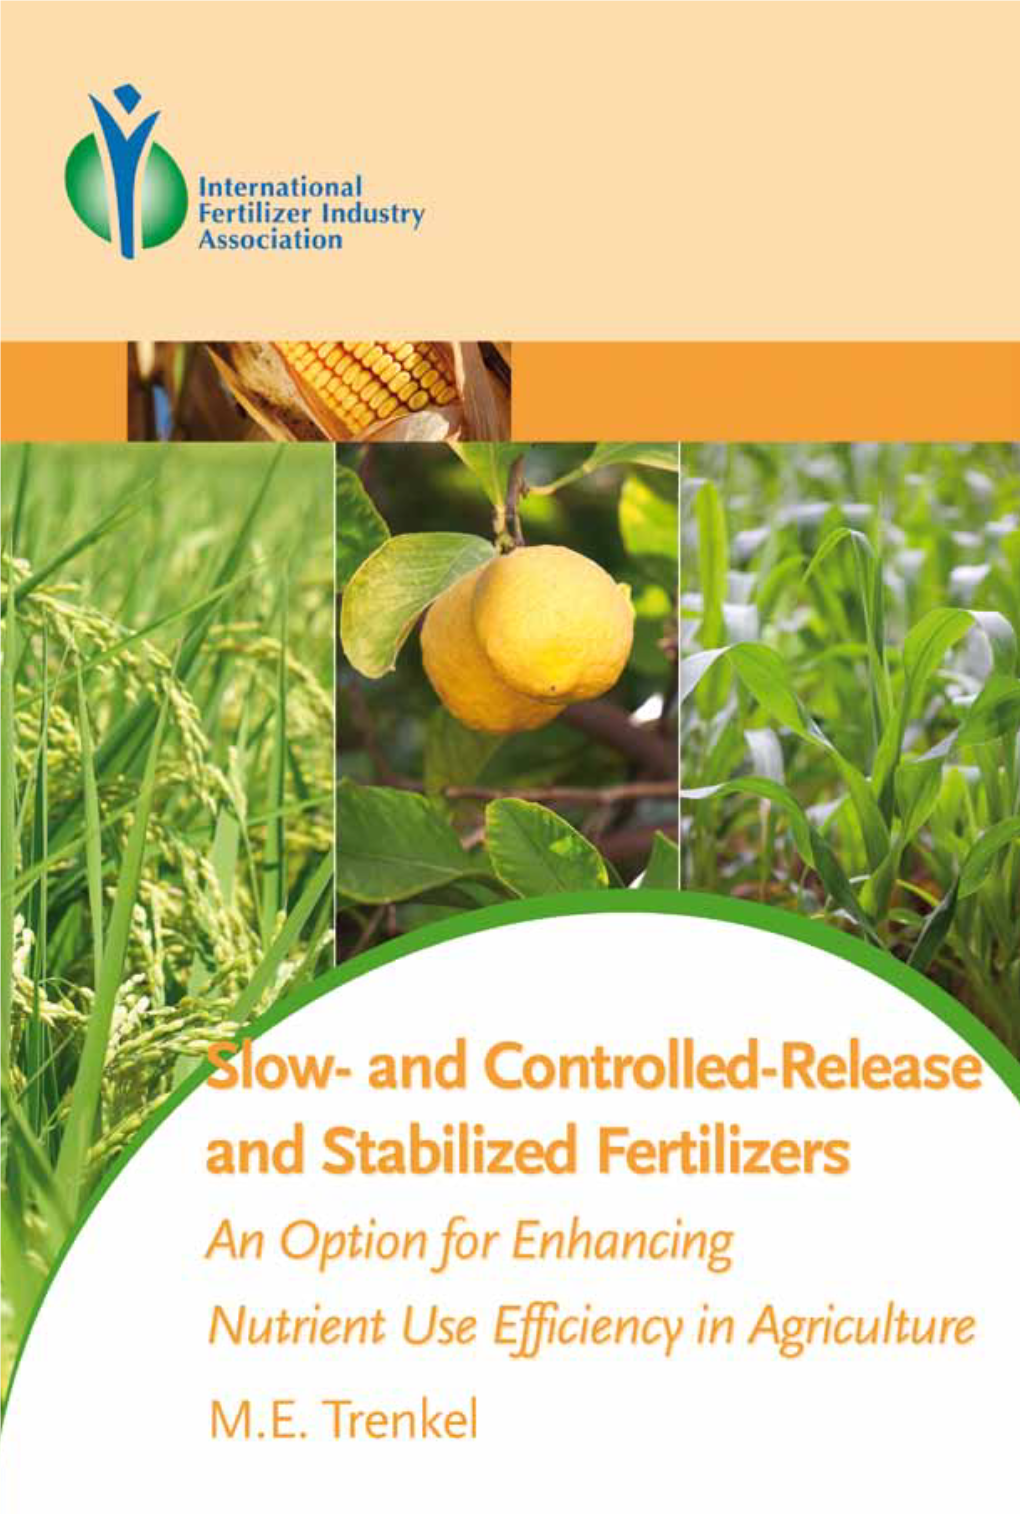 Slow- and Controlled-Release and Stabilized Fertilizers: an Option for Enhancing Nutrient Use Efficiency in Agriculture